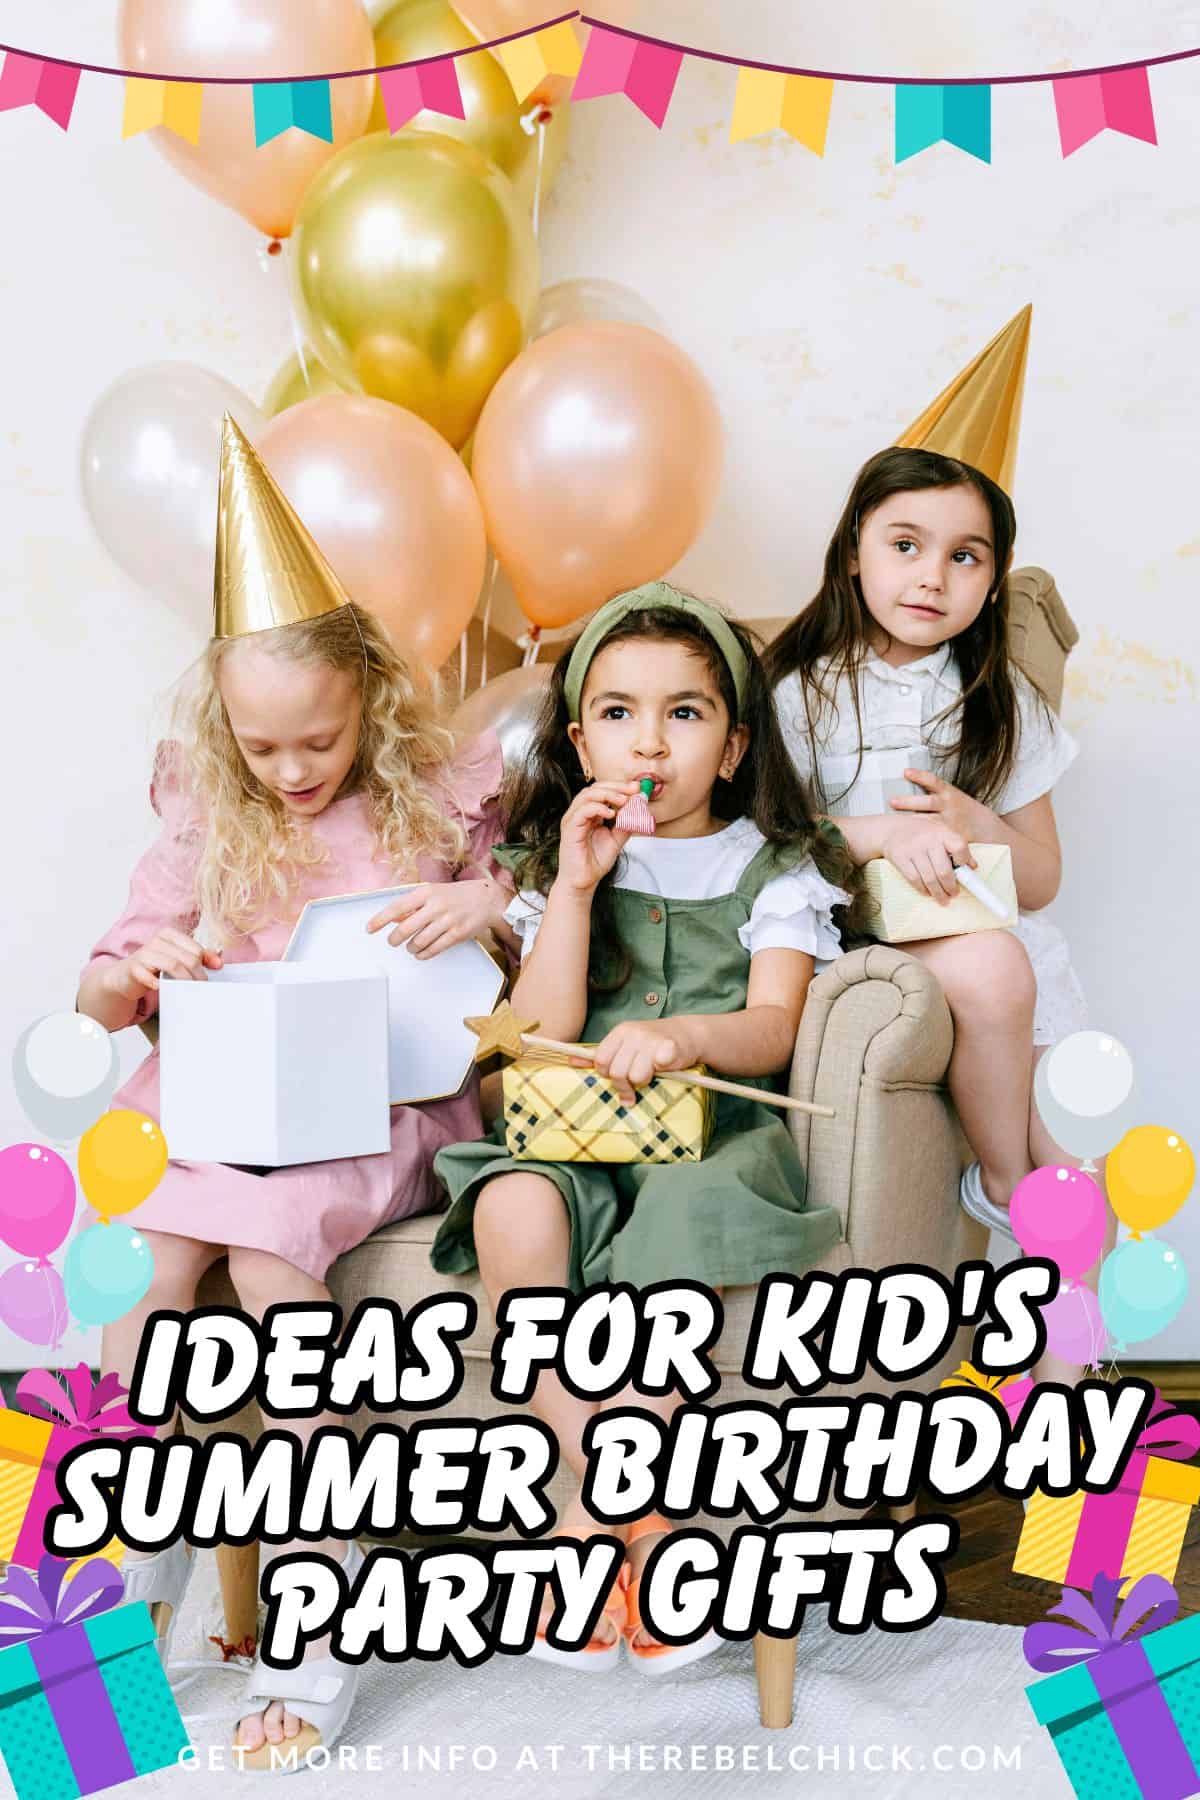 Ideas for Kid's Summer Birthday Party Gifts